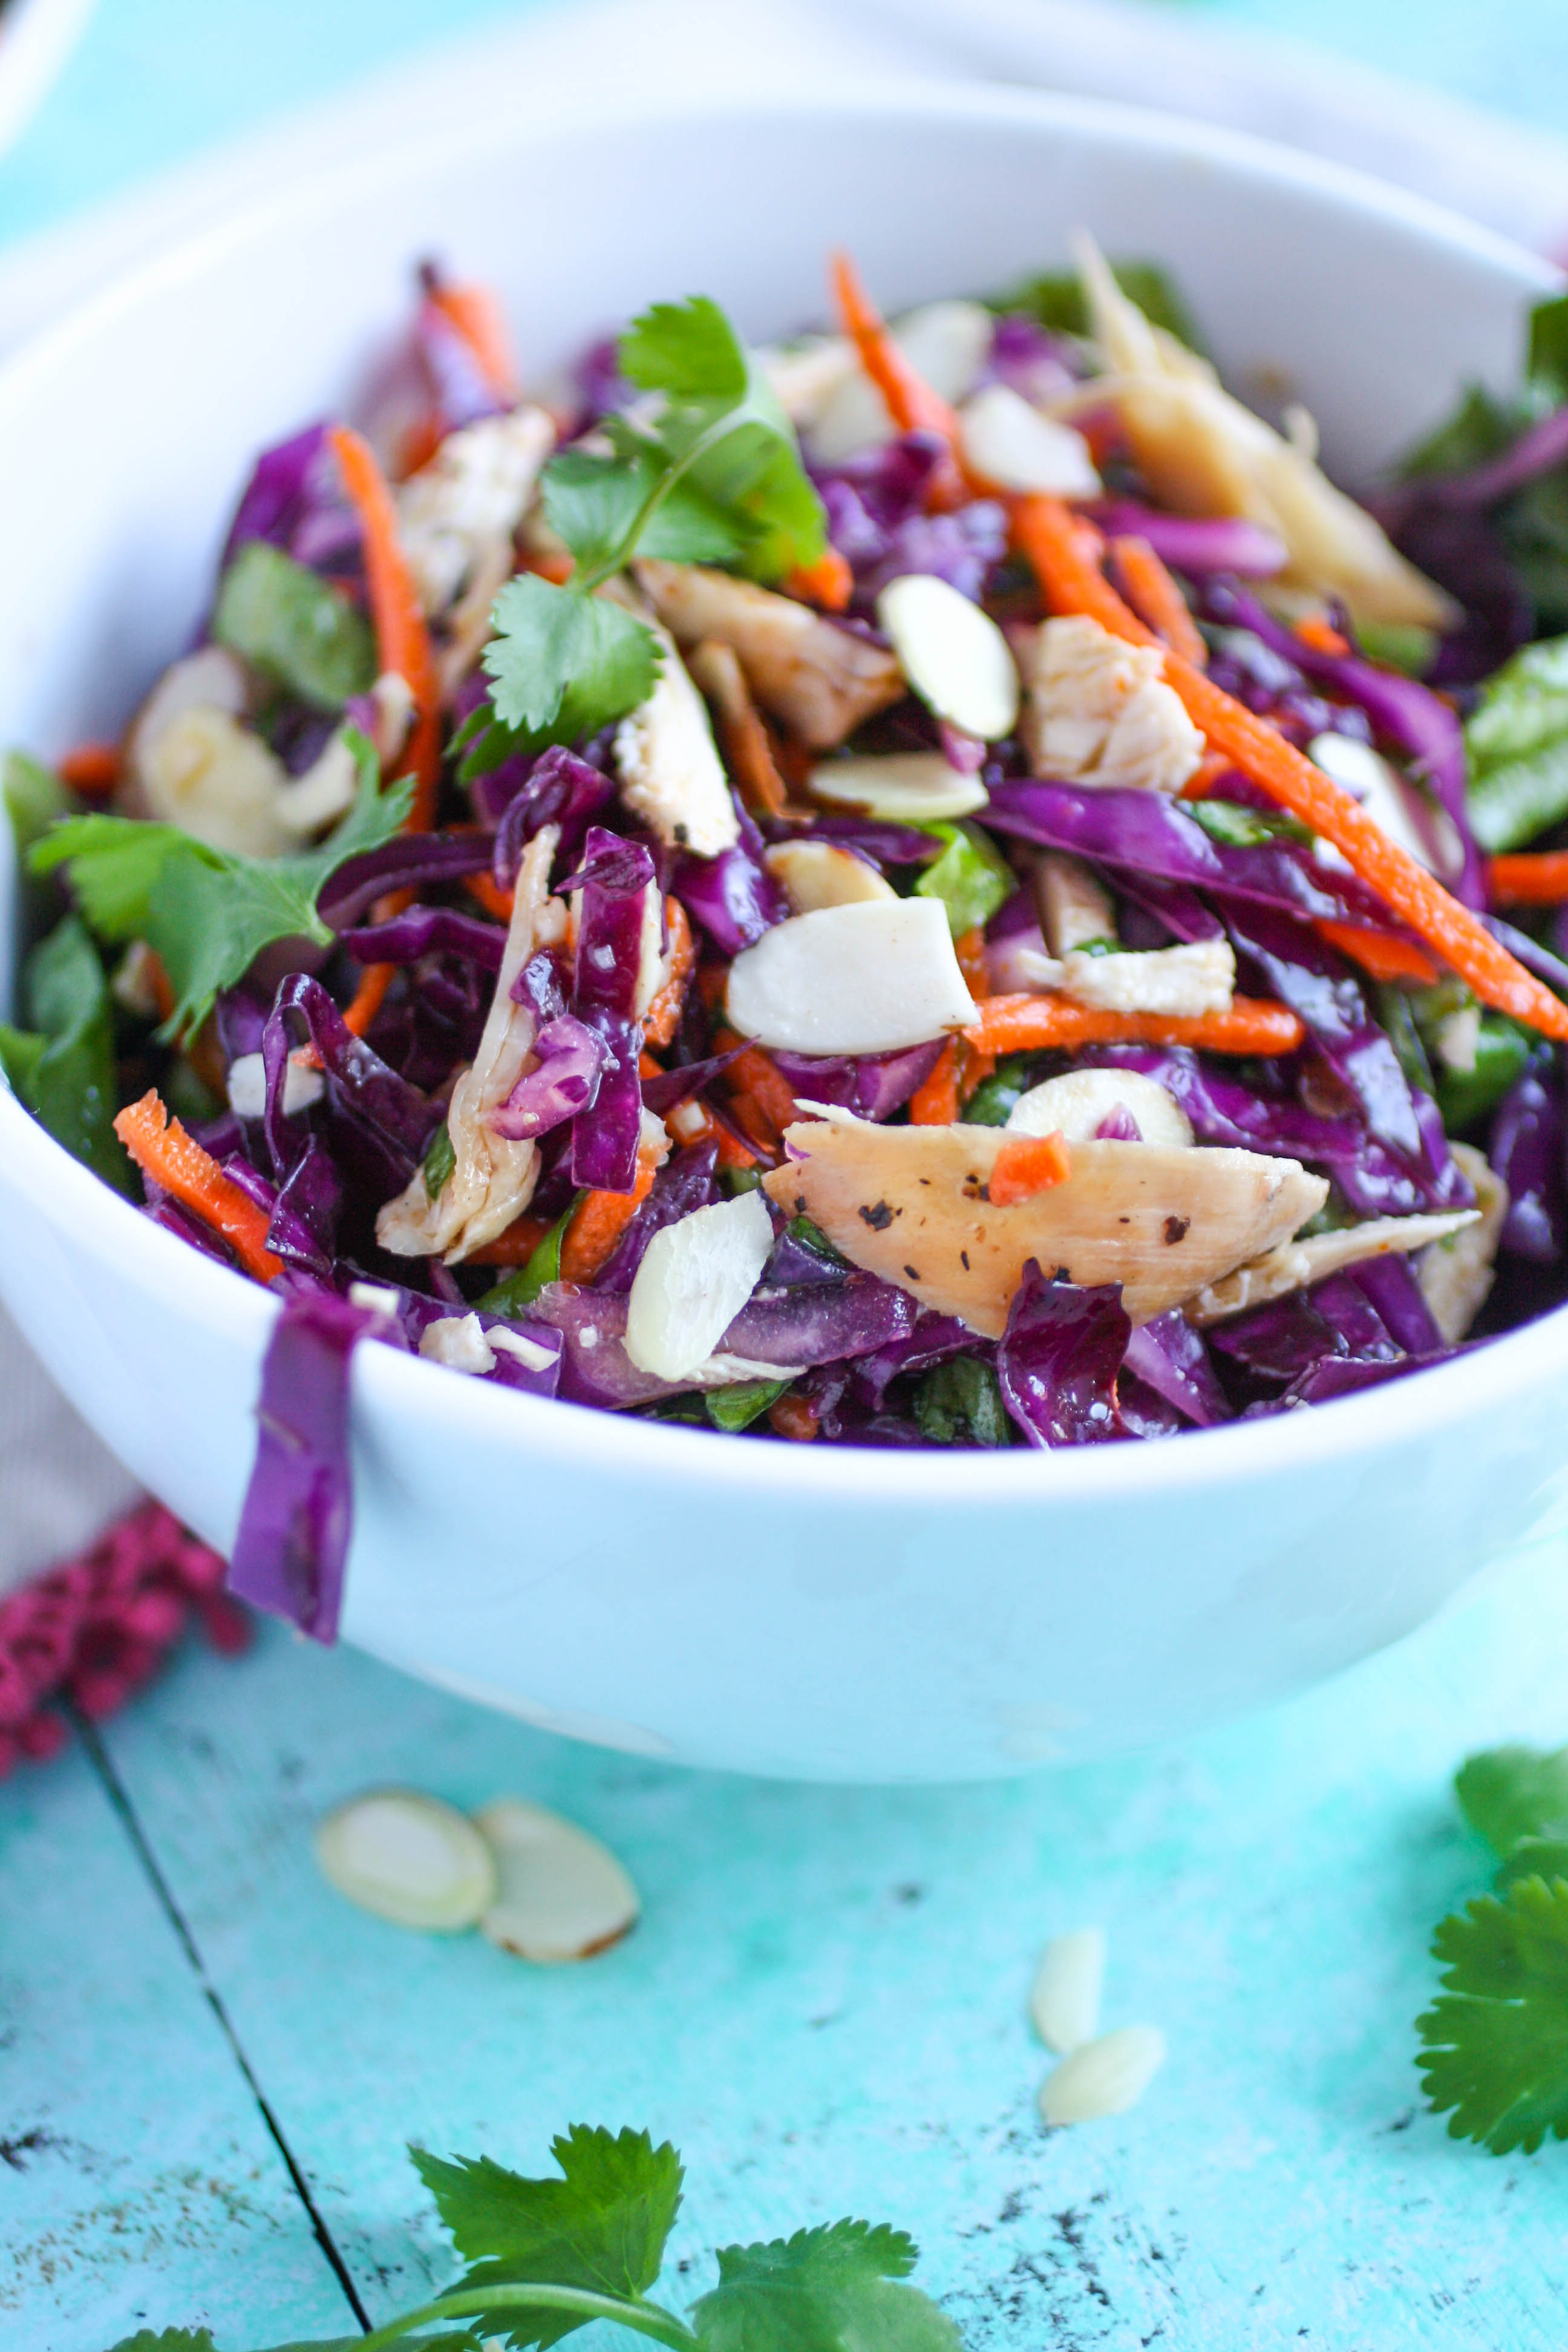 Crunchy Cabbage & Chicken Salad with Sesame Dressing is a great salad if you like crunch and color and flavor! This cabbage salad includes chicken to make it satisfying!